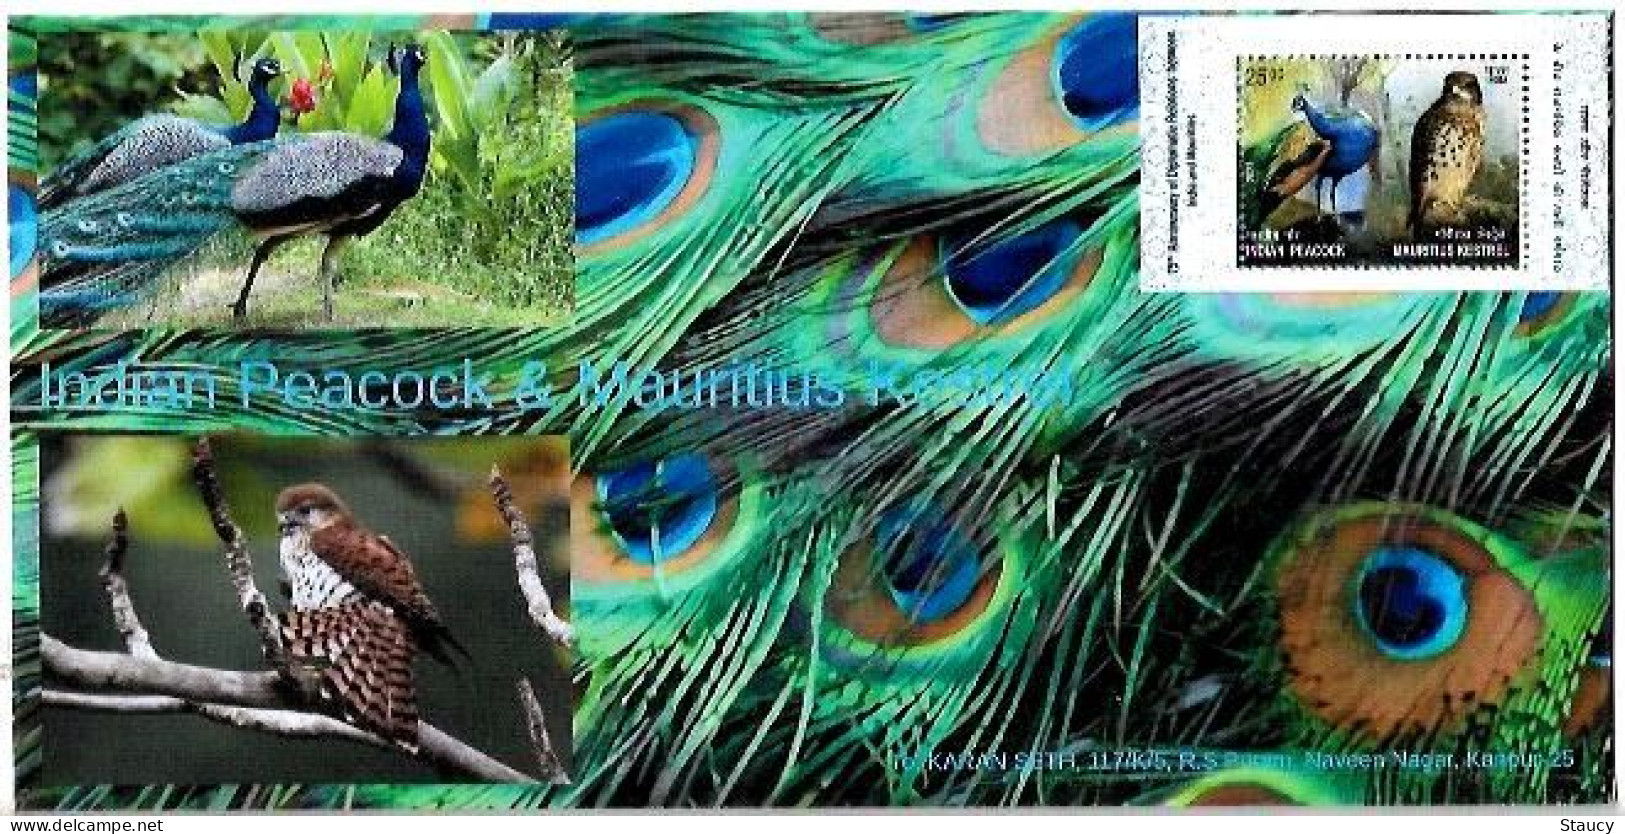 India 2023 India – Mauritius Joint Issue Souvenir Special FIRST DAY COVER FDC ADDRESSED To YOU By Regd AirMail - Pfauen